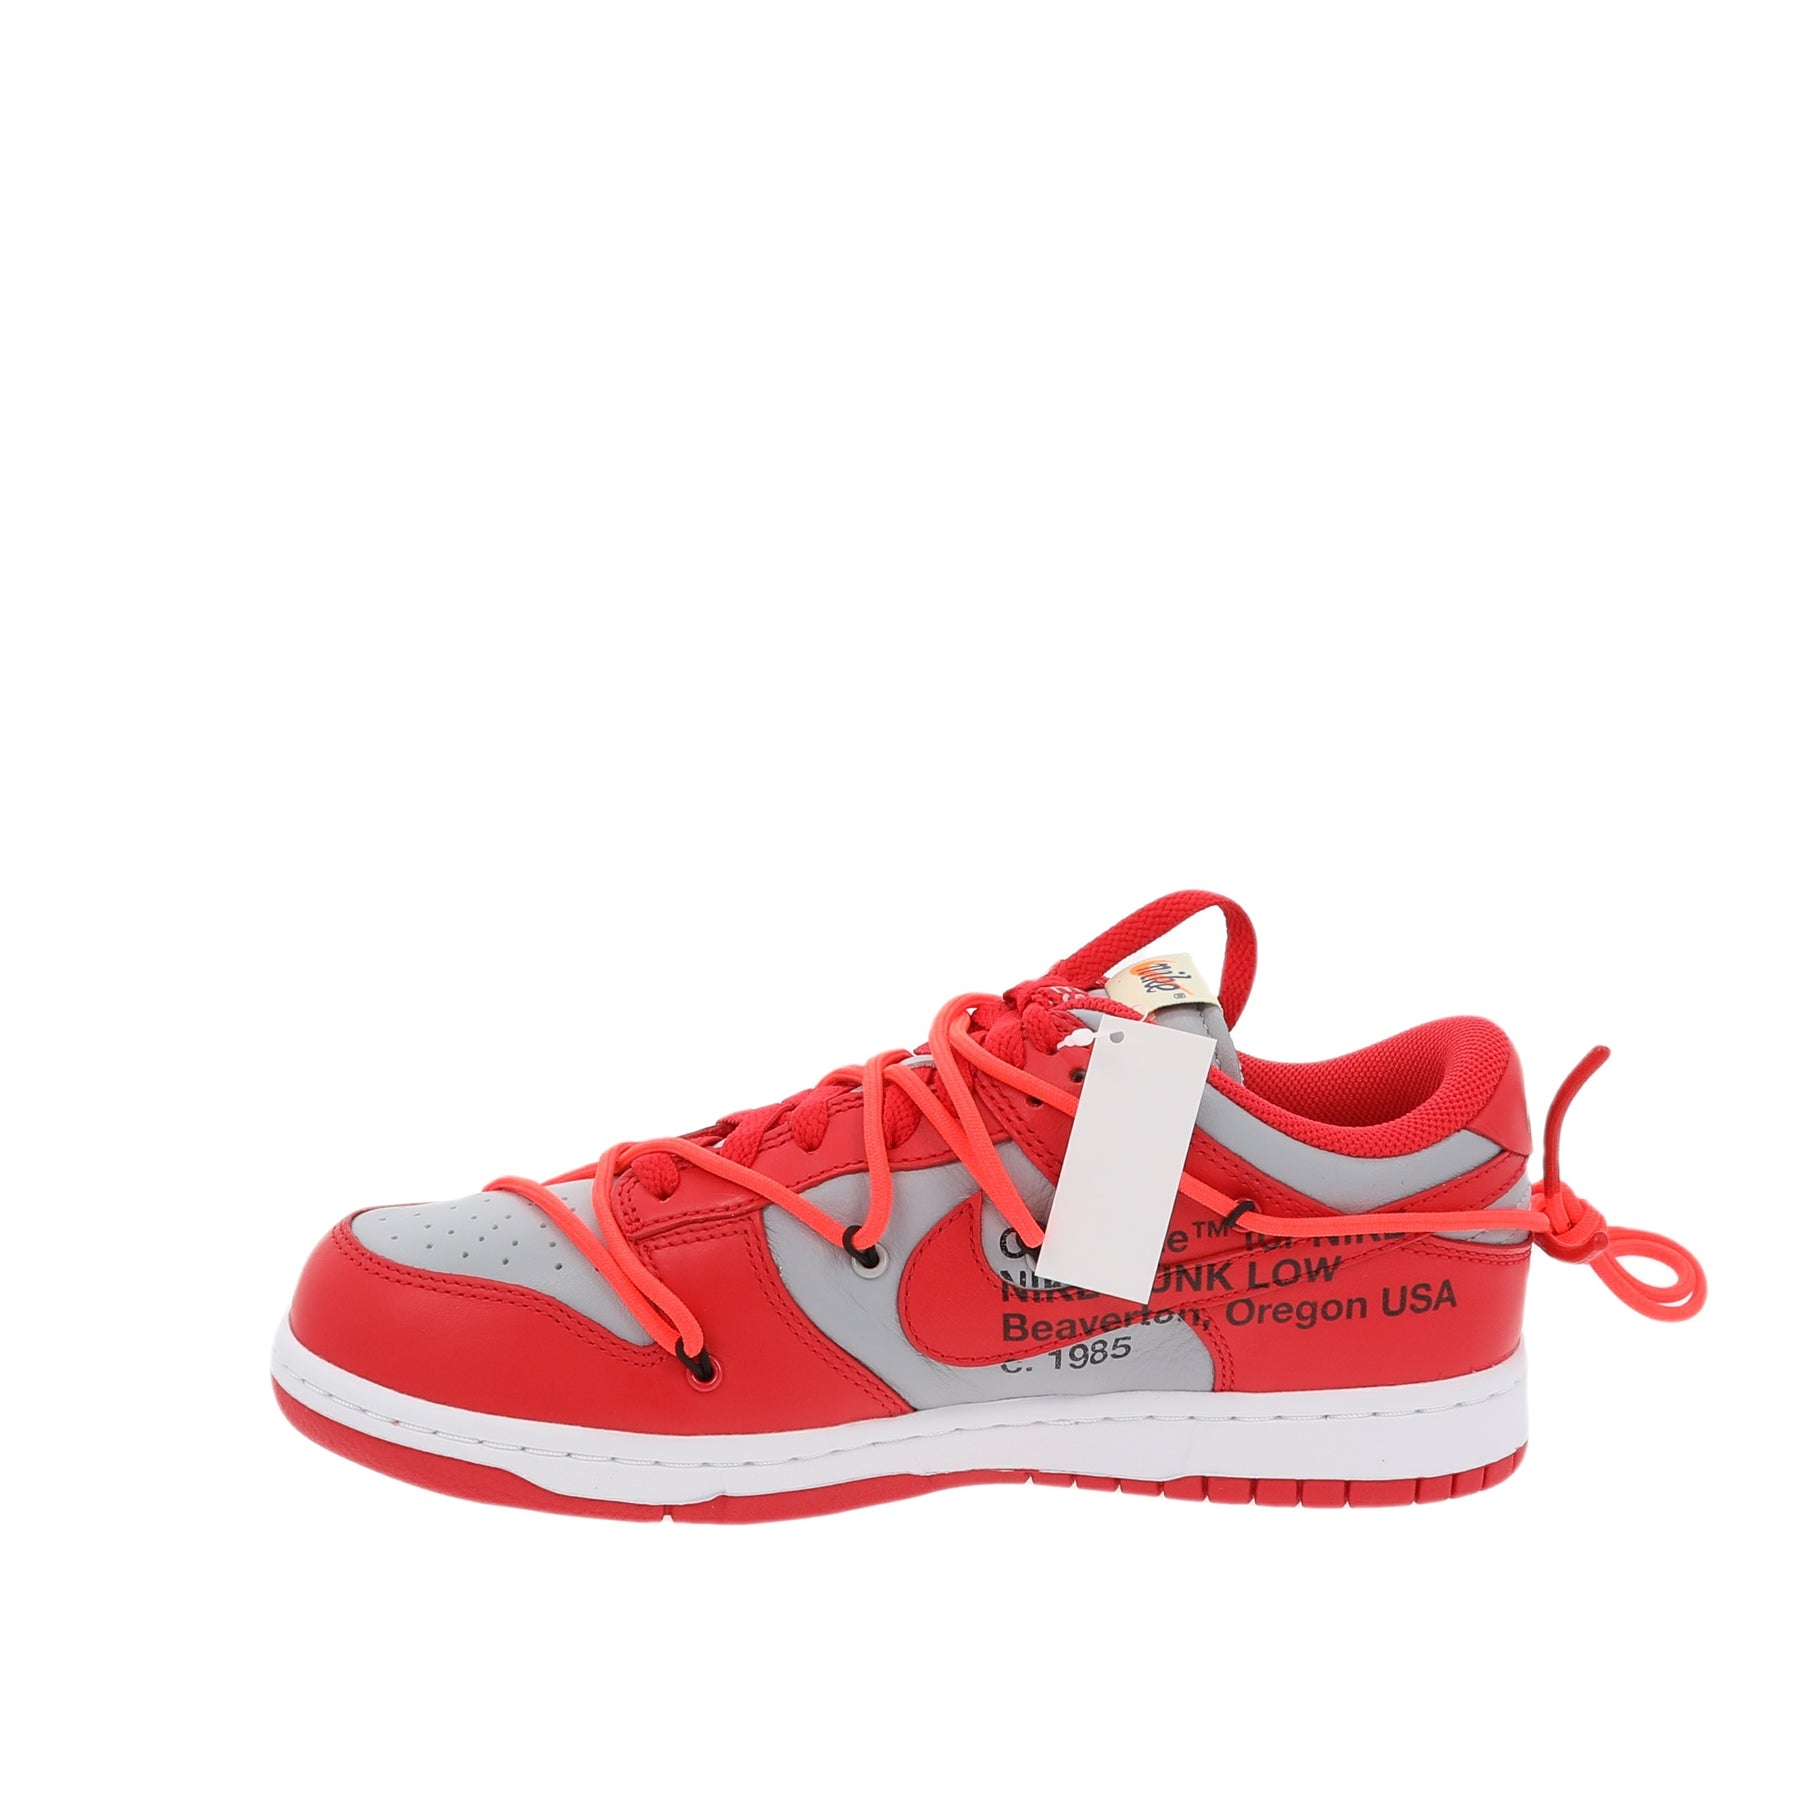 Buy Nike X Off-White Dunk Low Off-White - University Red